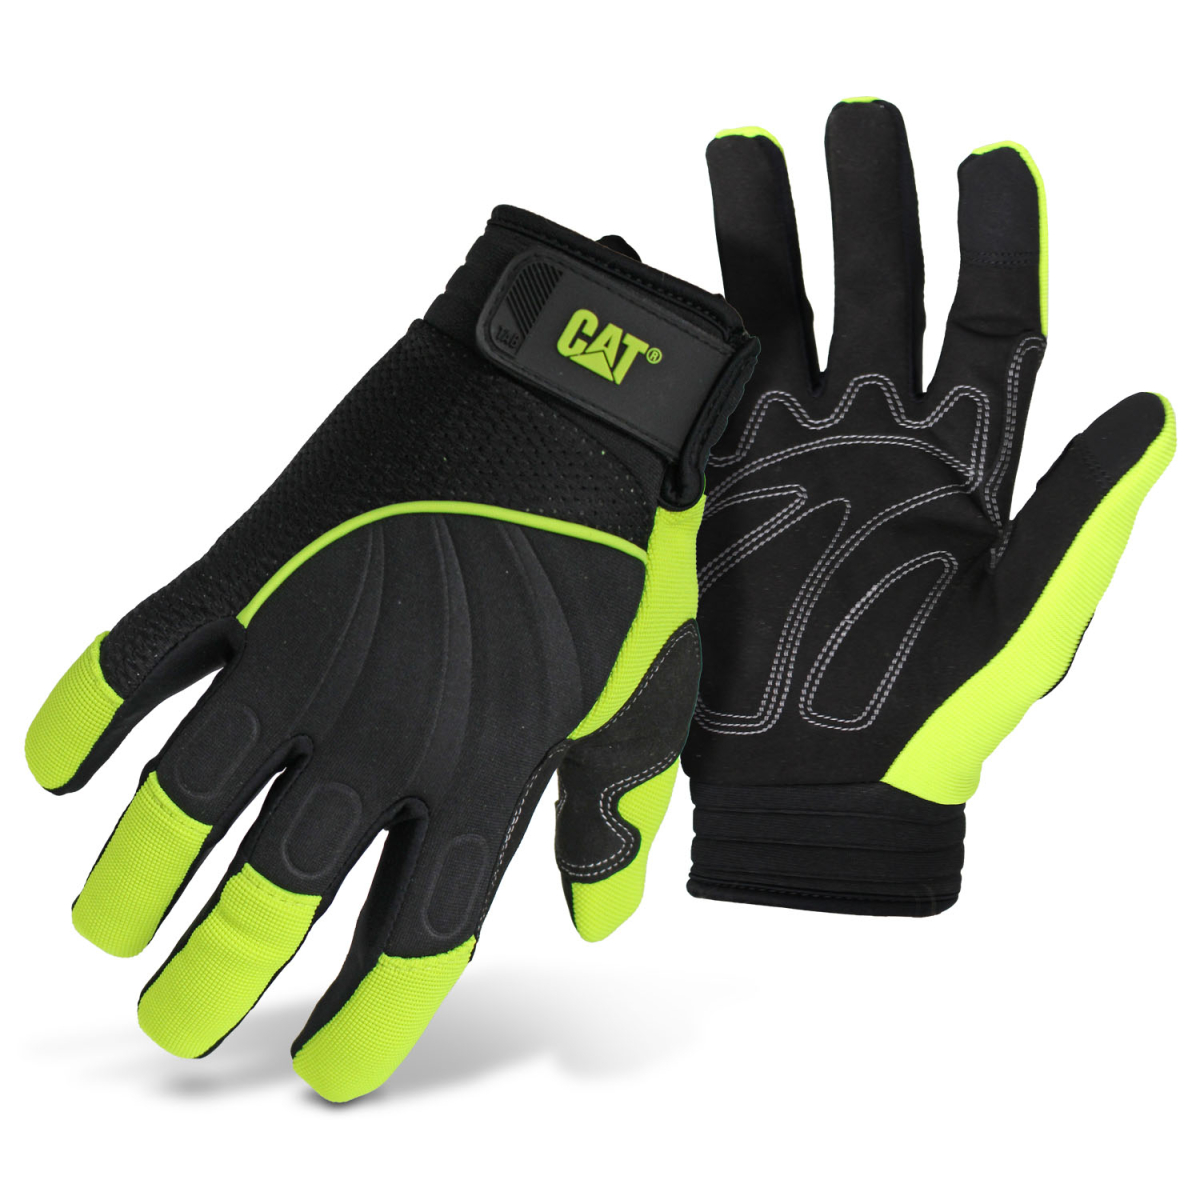 CAT CAT012224-L Mechanic Gloves, Men's, L, Adjustable Wrist Cuff, Synthetic Leather, Green